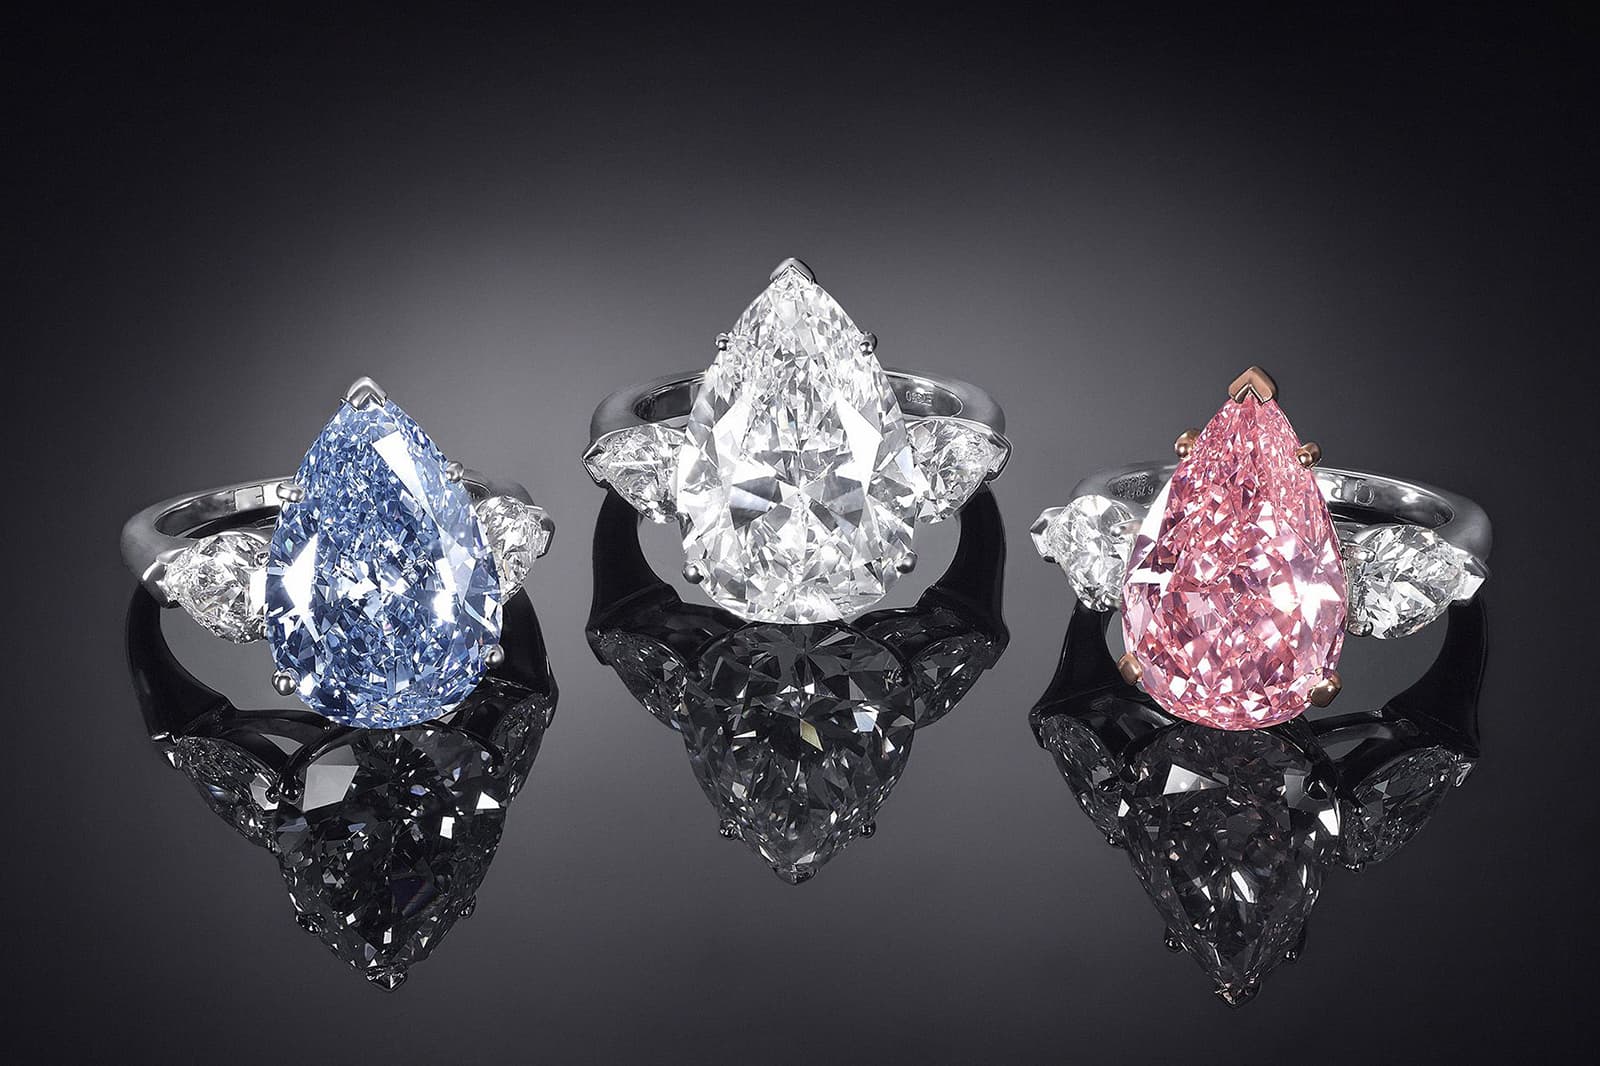 Graff is renowned for cutting and polishing some of the rarest and most exceptional coloured diamonds in the world